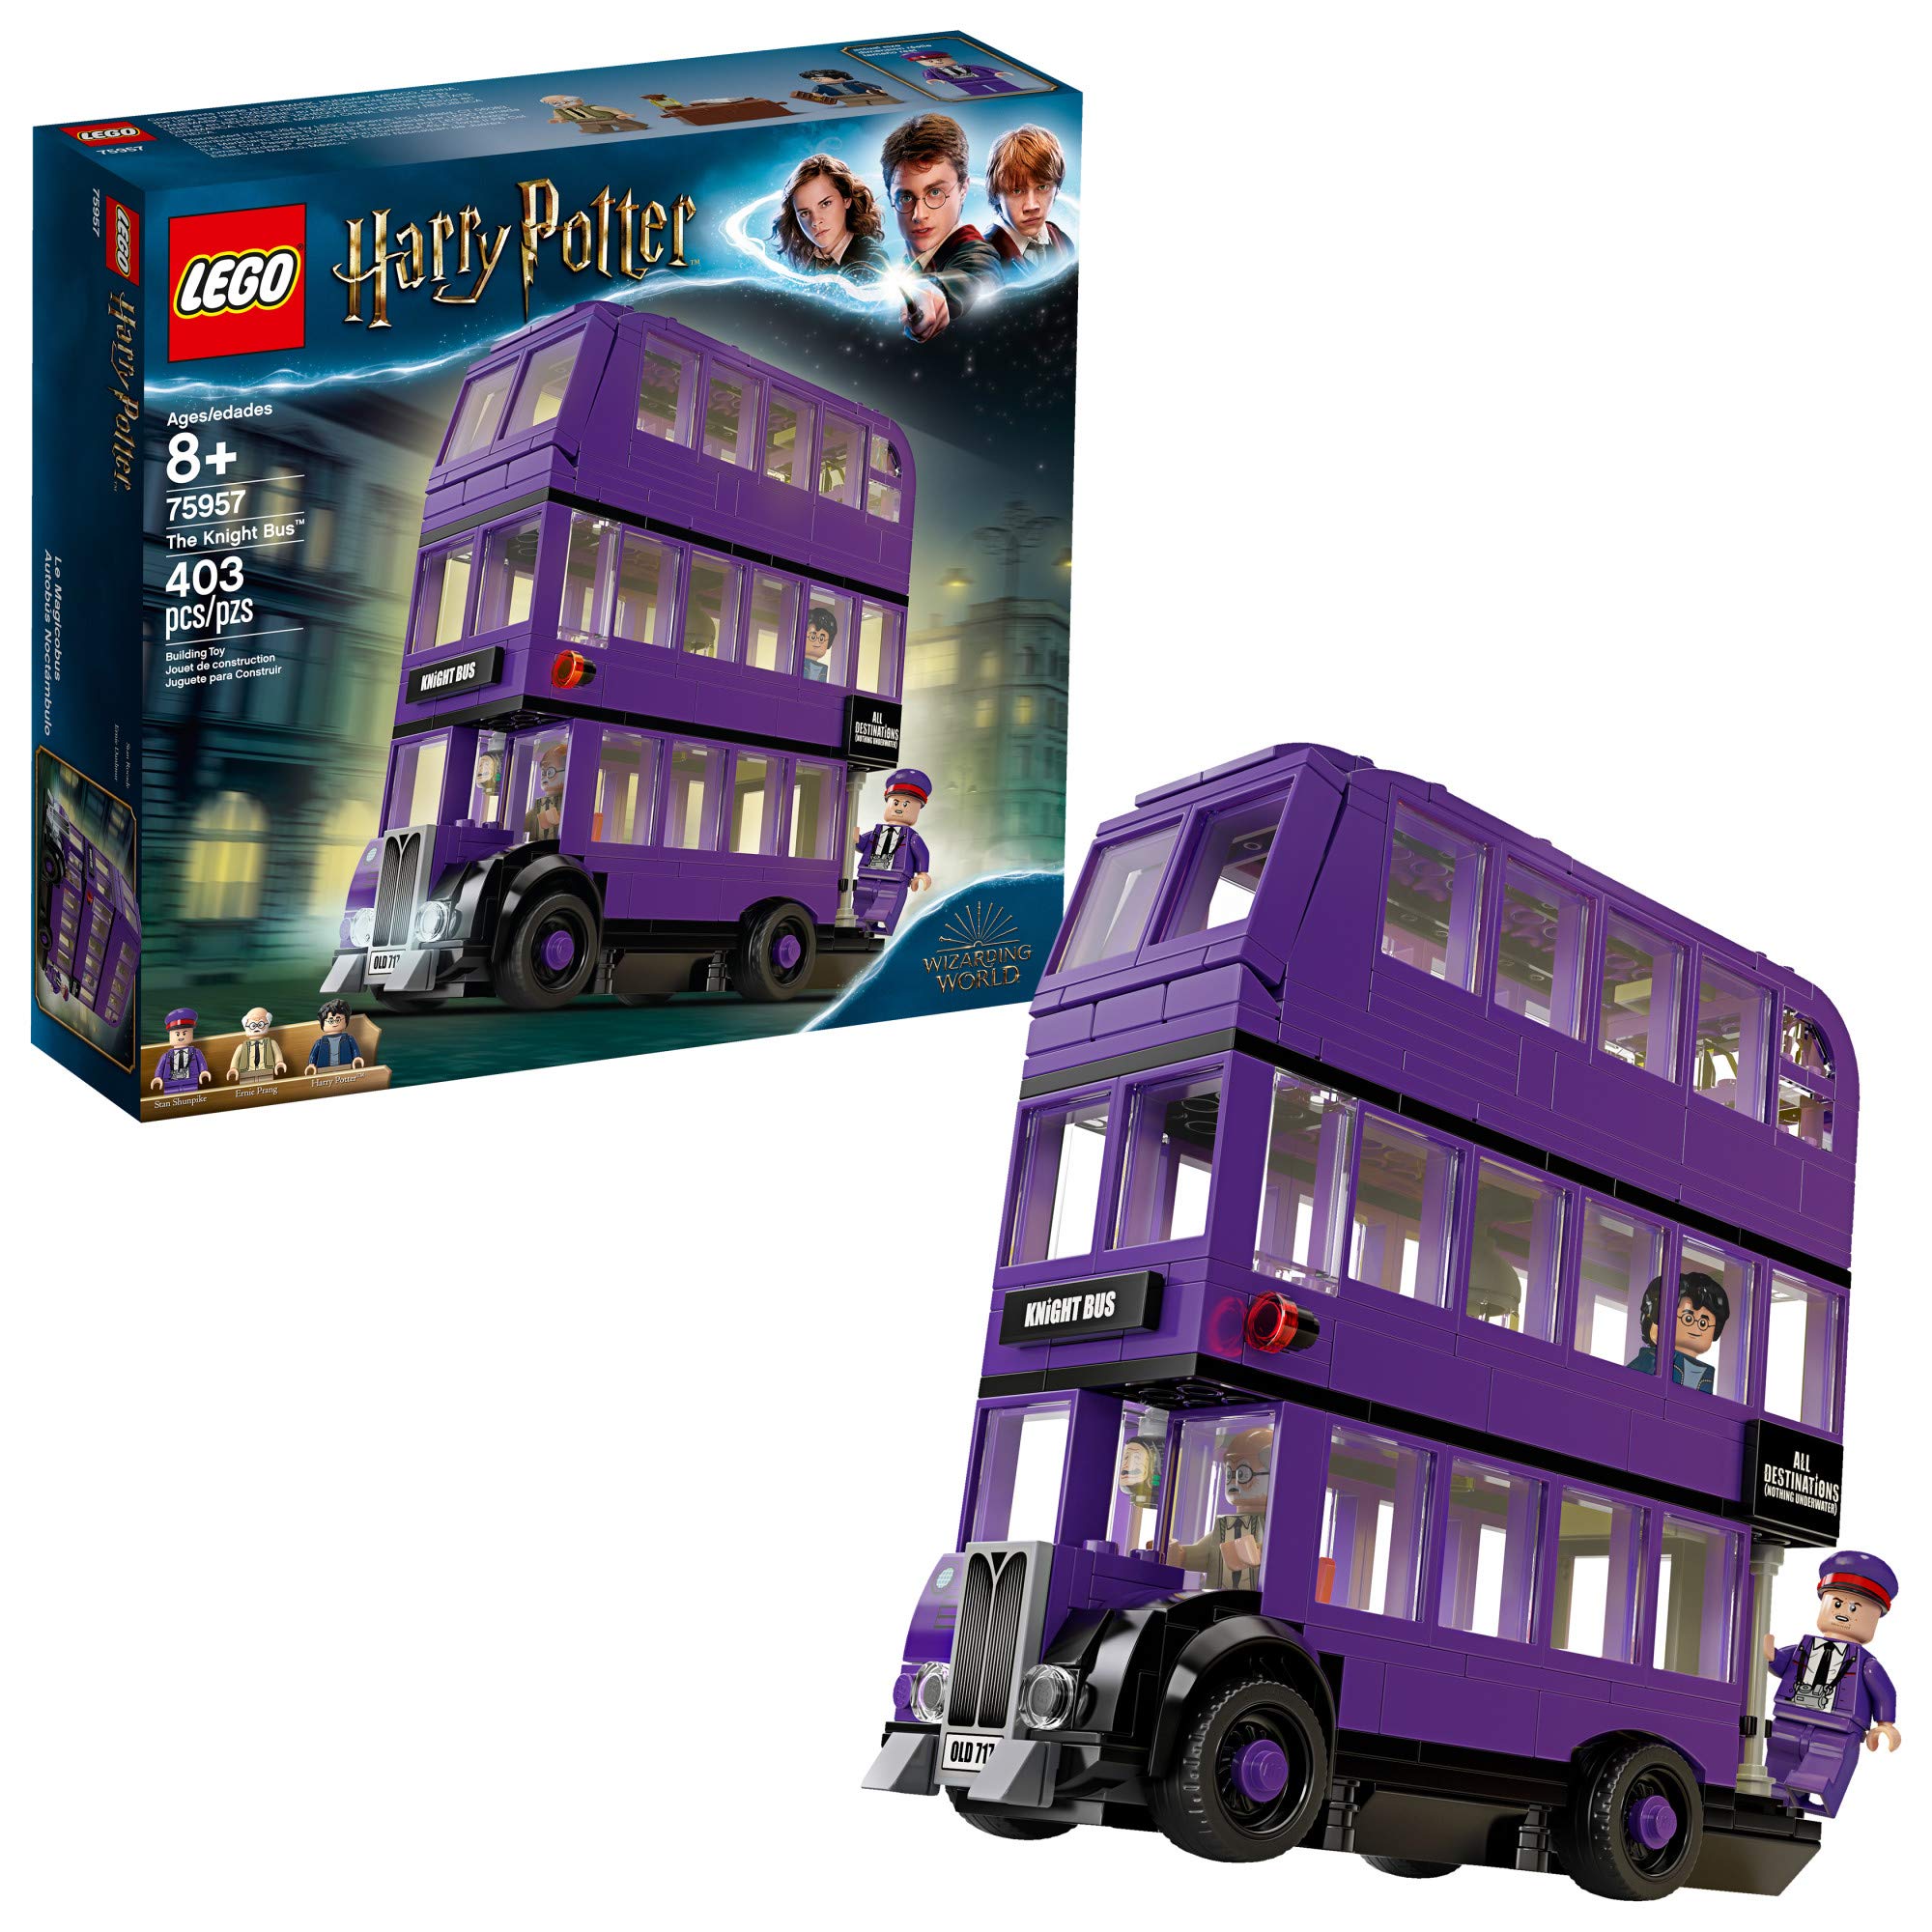 LEGO Harry Potter and The Prisoner of Azkaban Knight Bus 75957 Building Kit (403 Pieces) (Like New, Open Box)